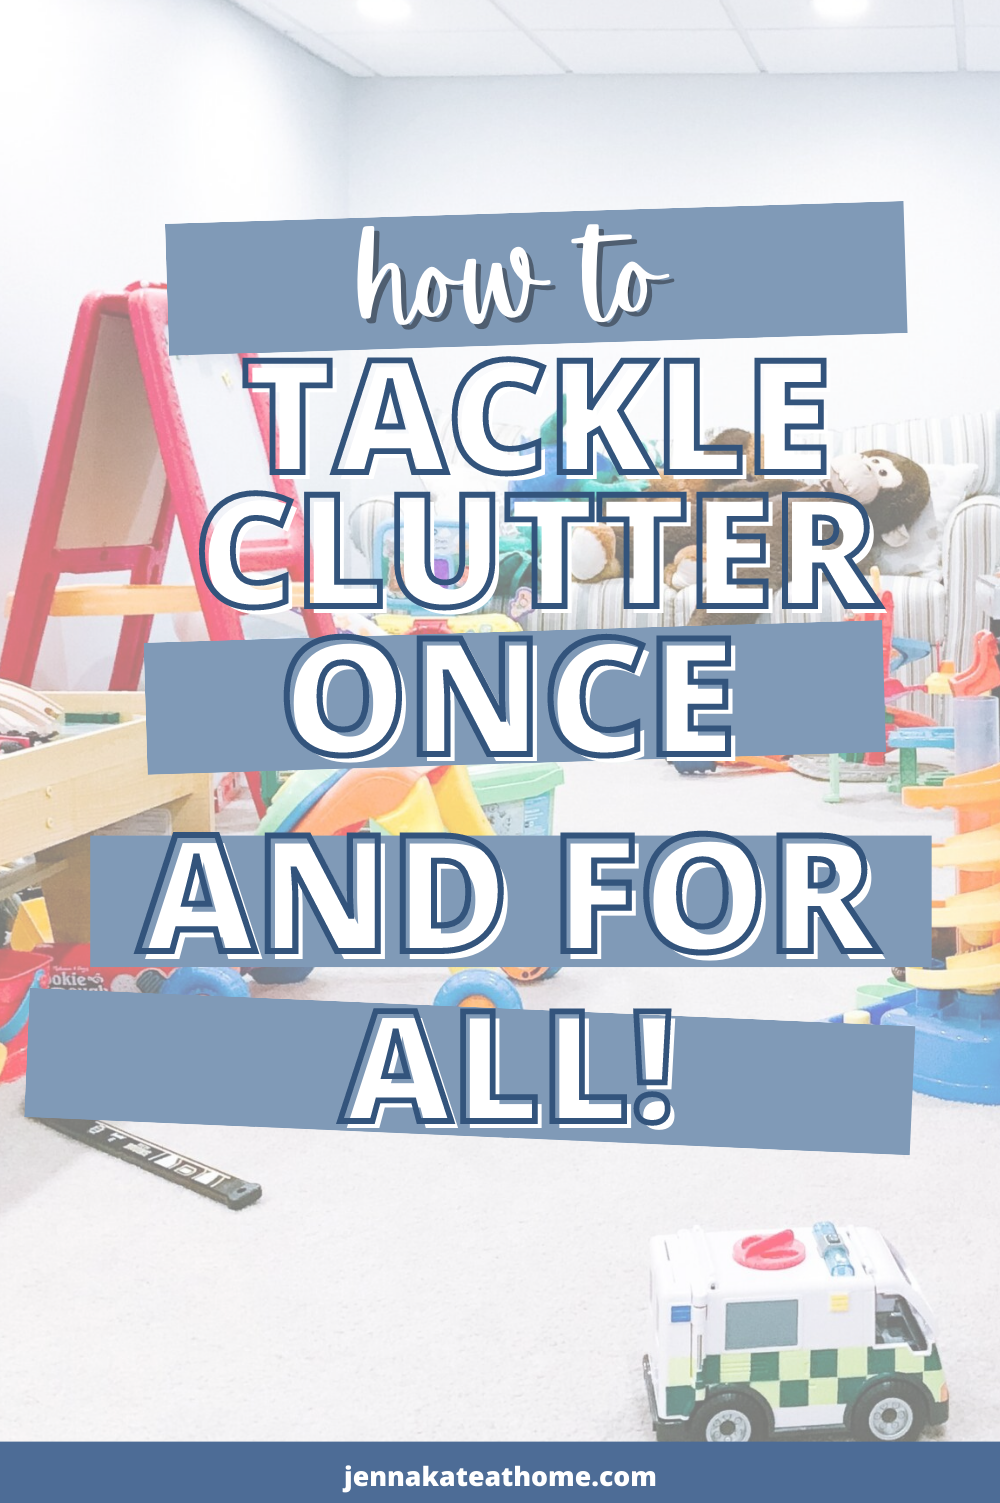 How to tackle clutter once and for all